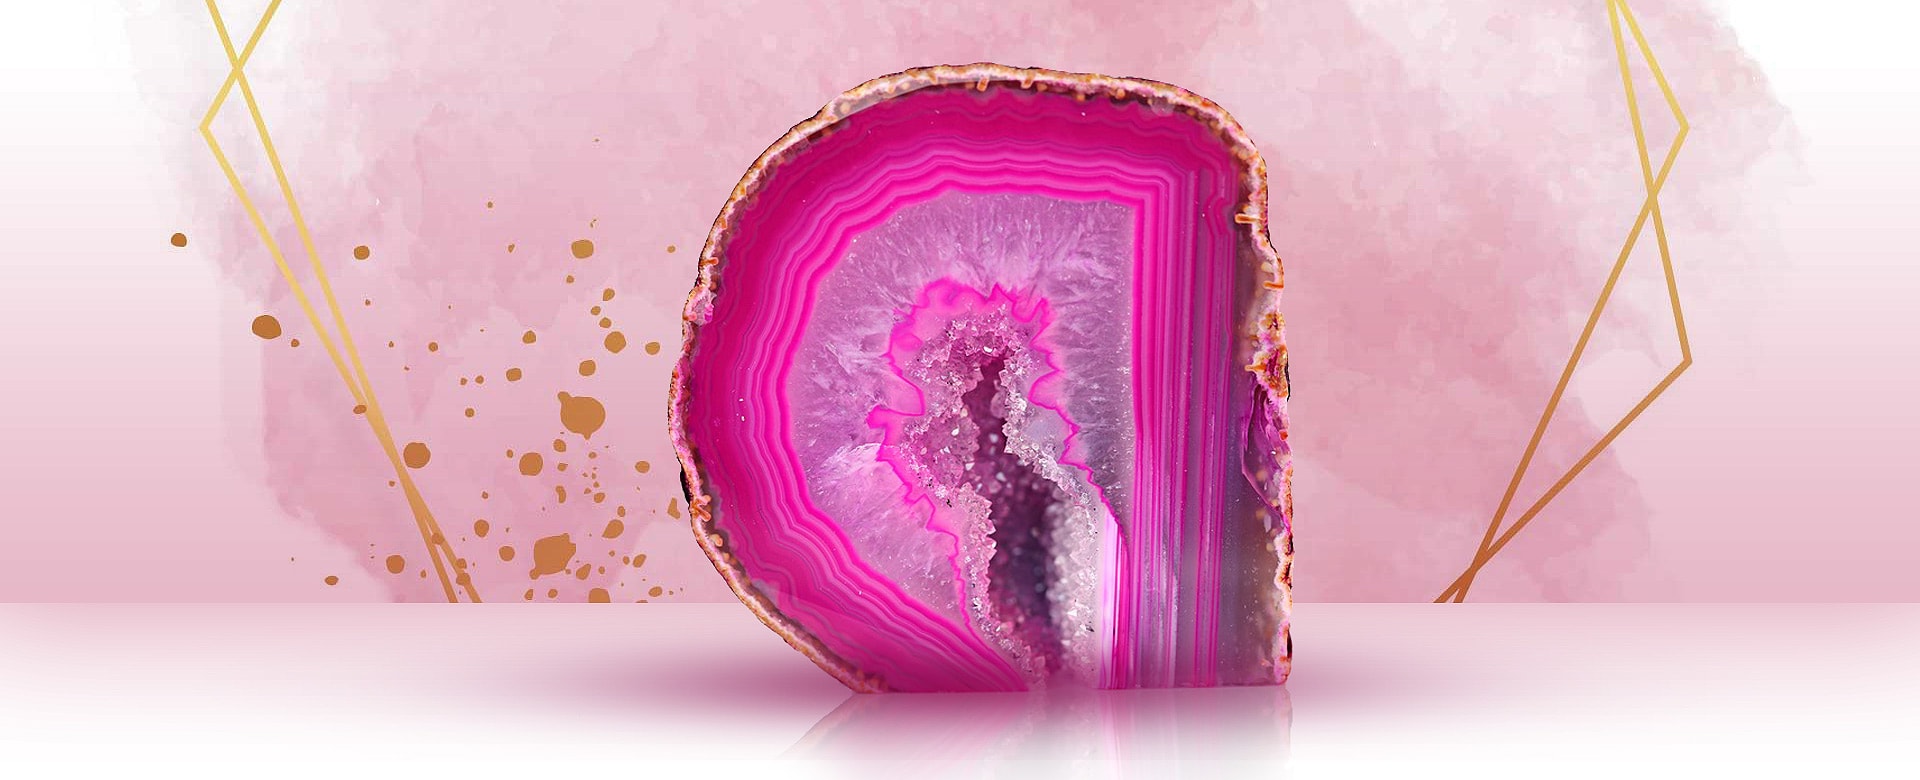 Pink Agate Meaning and Properties 1